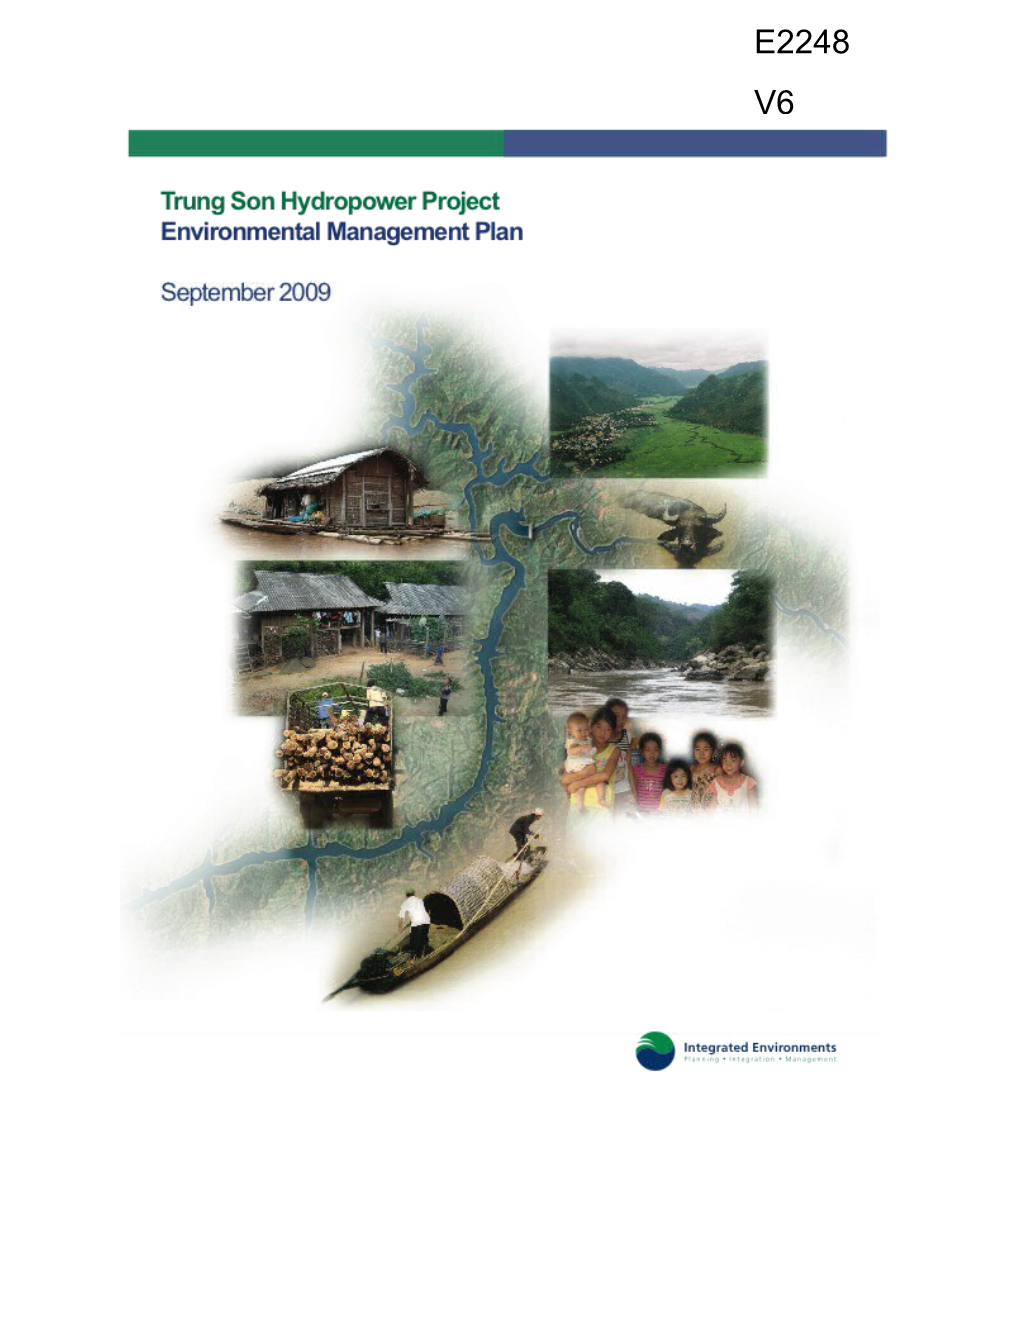 Trung Son Hydropower Project